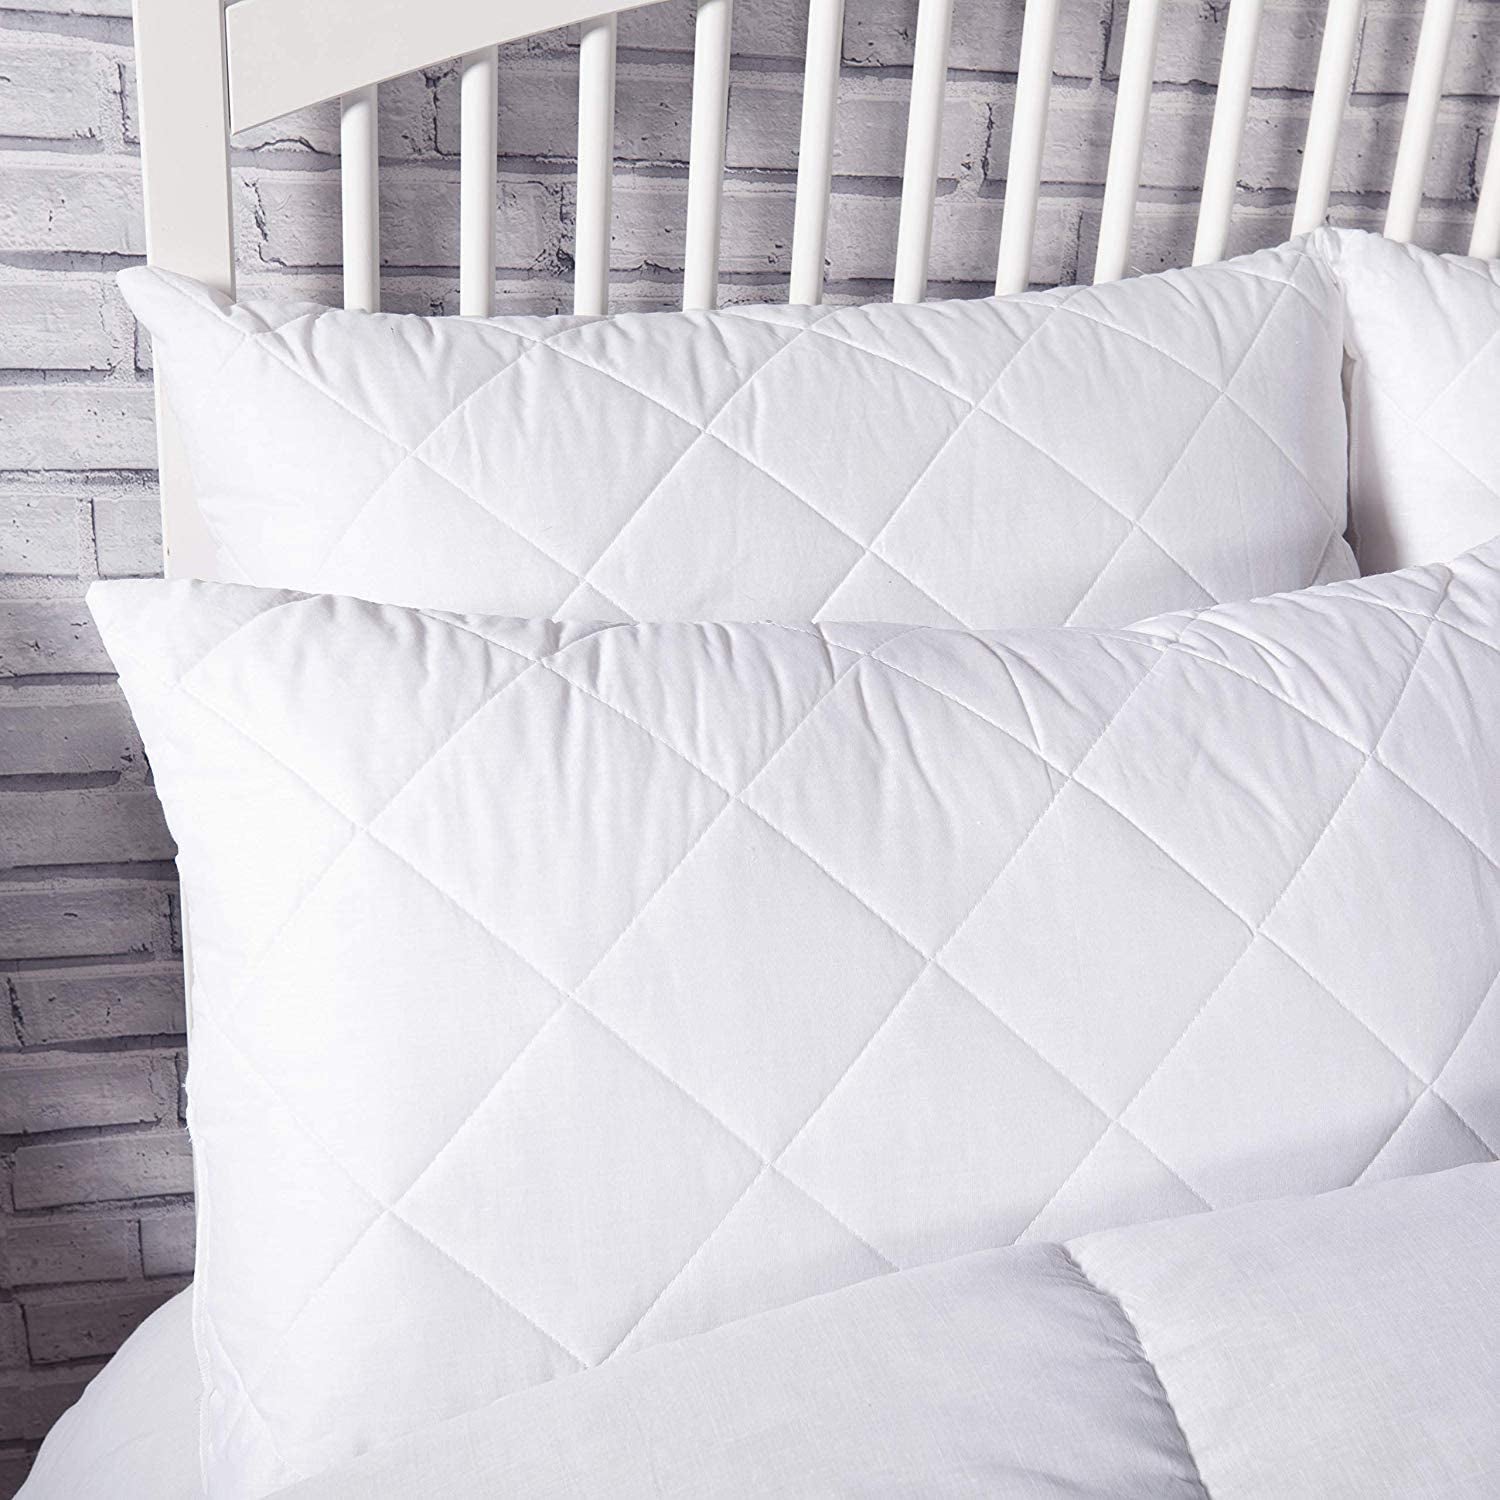 Pillows 2 Pack Hotel Quality with Quilted Cover- Premium Filled Pillows for Stomach, Back and Side Sleeper Pillow, down Alternative Bed Pillow-Soft Hollow-Fiber Hotel Pillows - FoxMart™️ - FoxMart™️